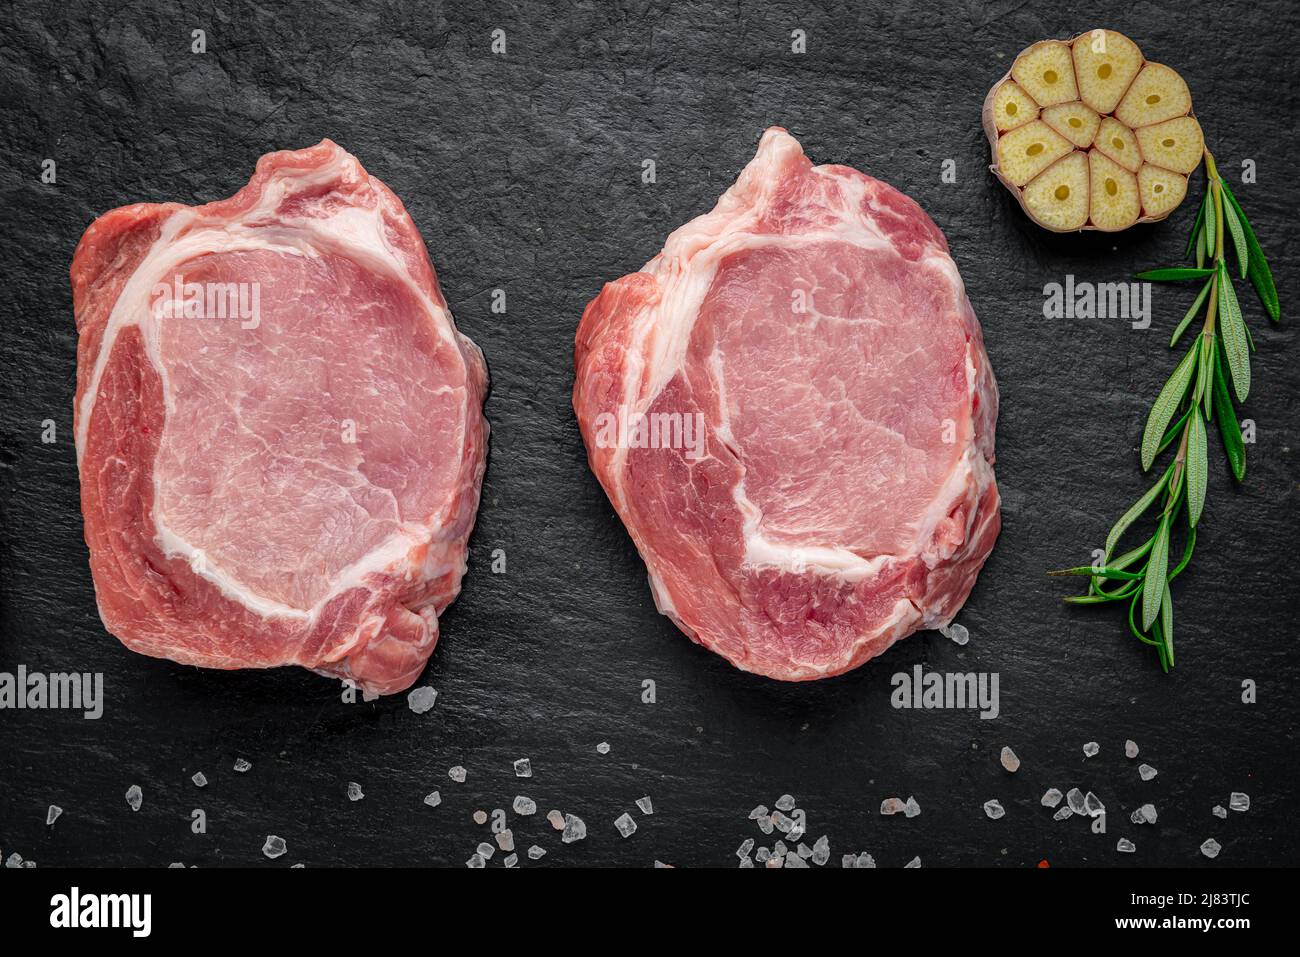 Raw organic meat. Pork steaks, fillets for grilling, baking or frying. Stock Photo